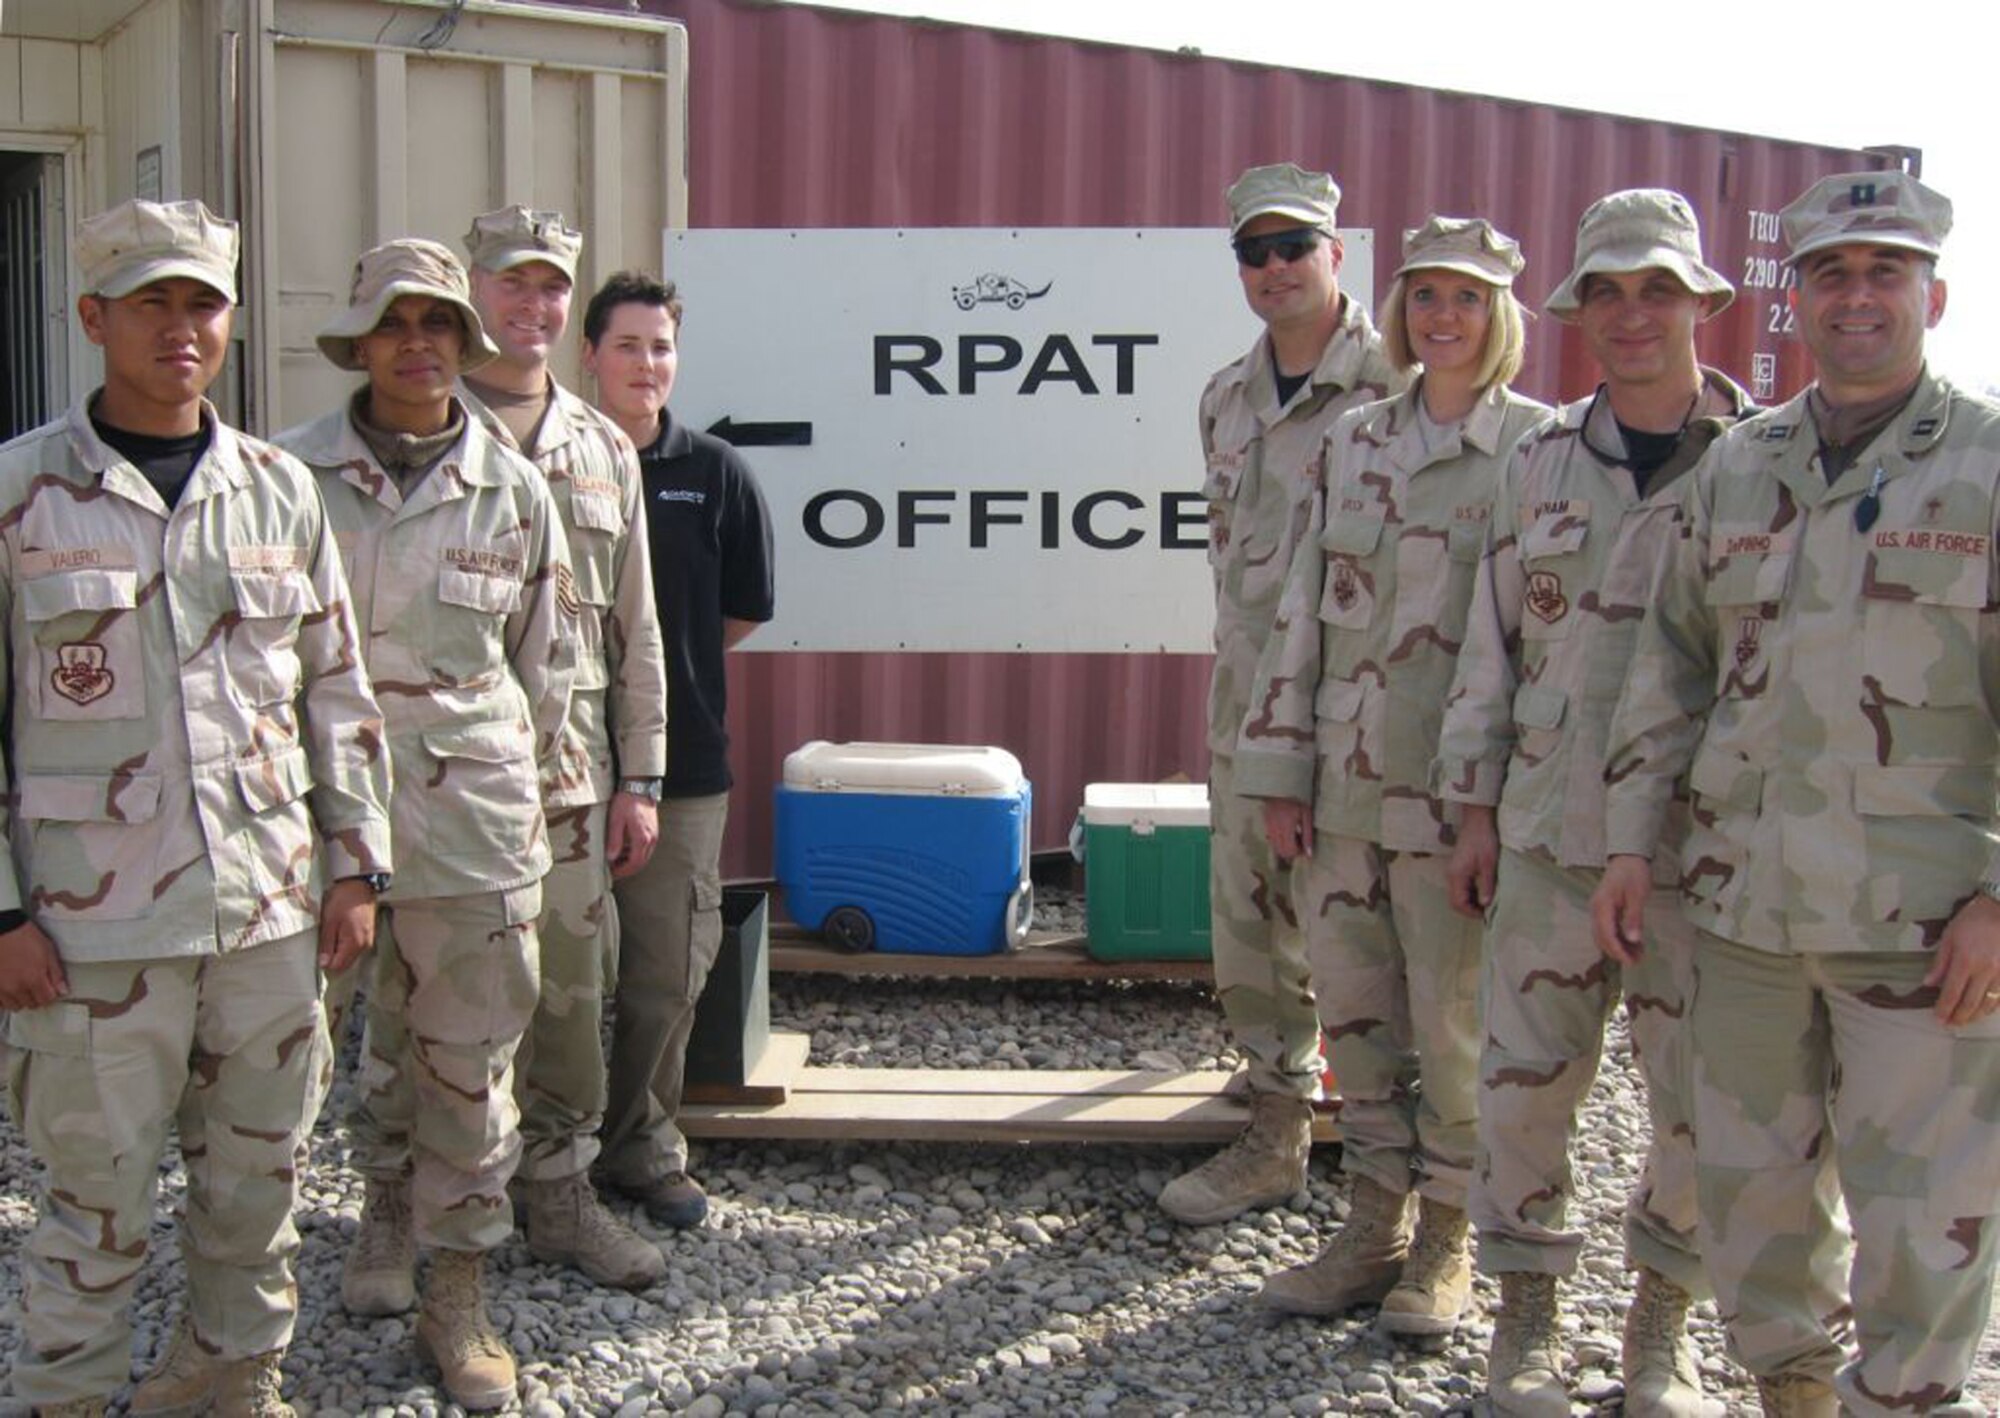 CONTINGENCY OPERATING BASE SPEICHER, Iraq -- Chap. (Capt.) David DePinho, (front-right,) a chaplain with the 332nd Air Expeditionary Wing, was inspired by the motivation shown by the men and women of the 732nd Expeditionary Logistics Readiness Squadron, Det 1 Retrograde Property Action Team or "RPAT" serving in "In-Lieu-Of", (ILO) positions for the Army as they process cargo and vehicles for movement by air instead of convoys, saving countless lives in the process. (Courtesy photo)